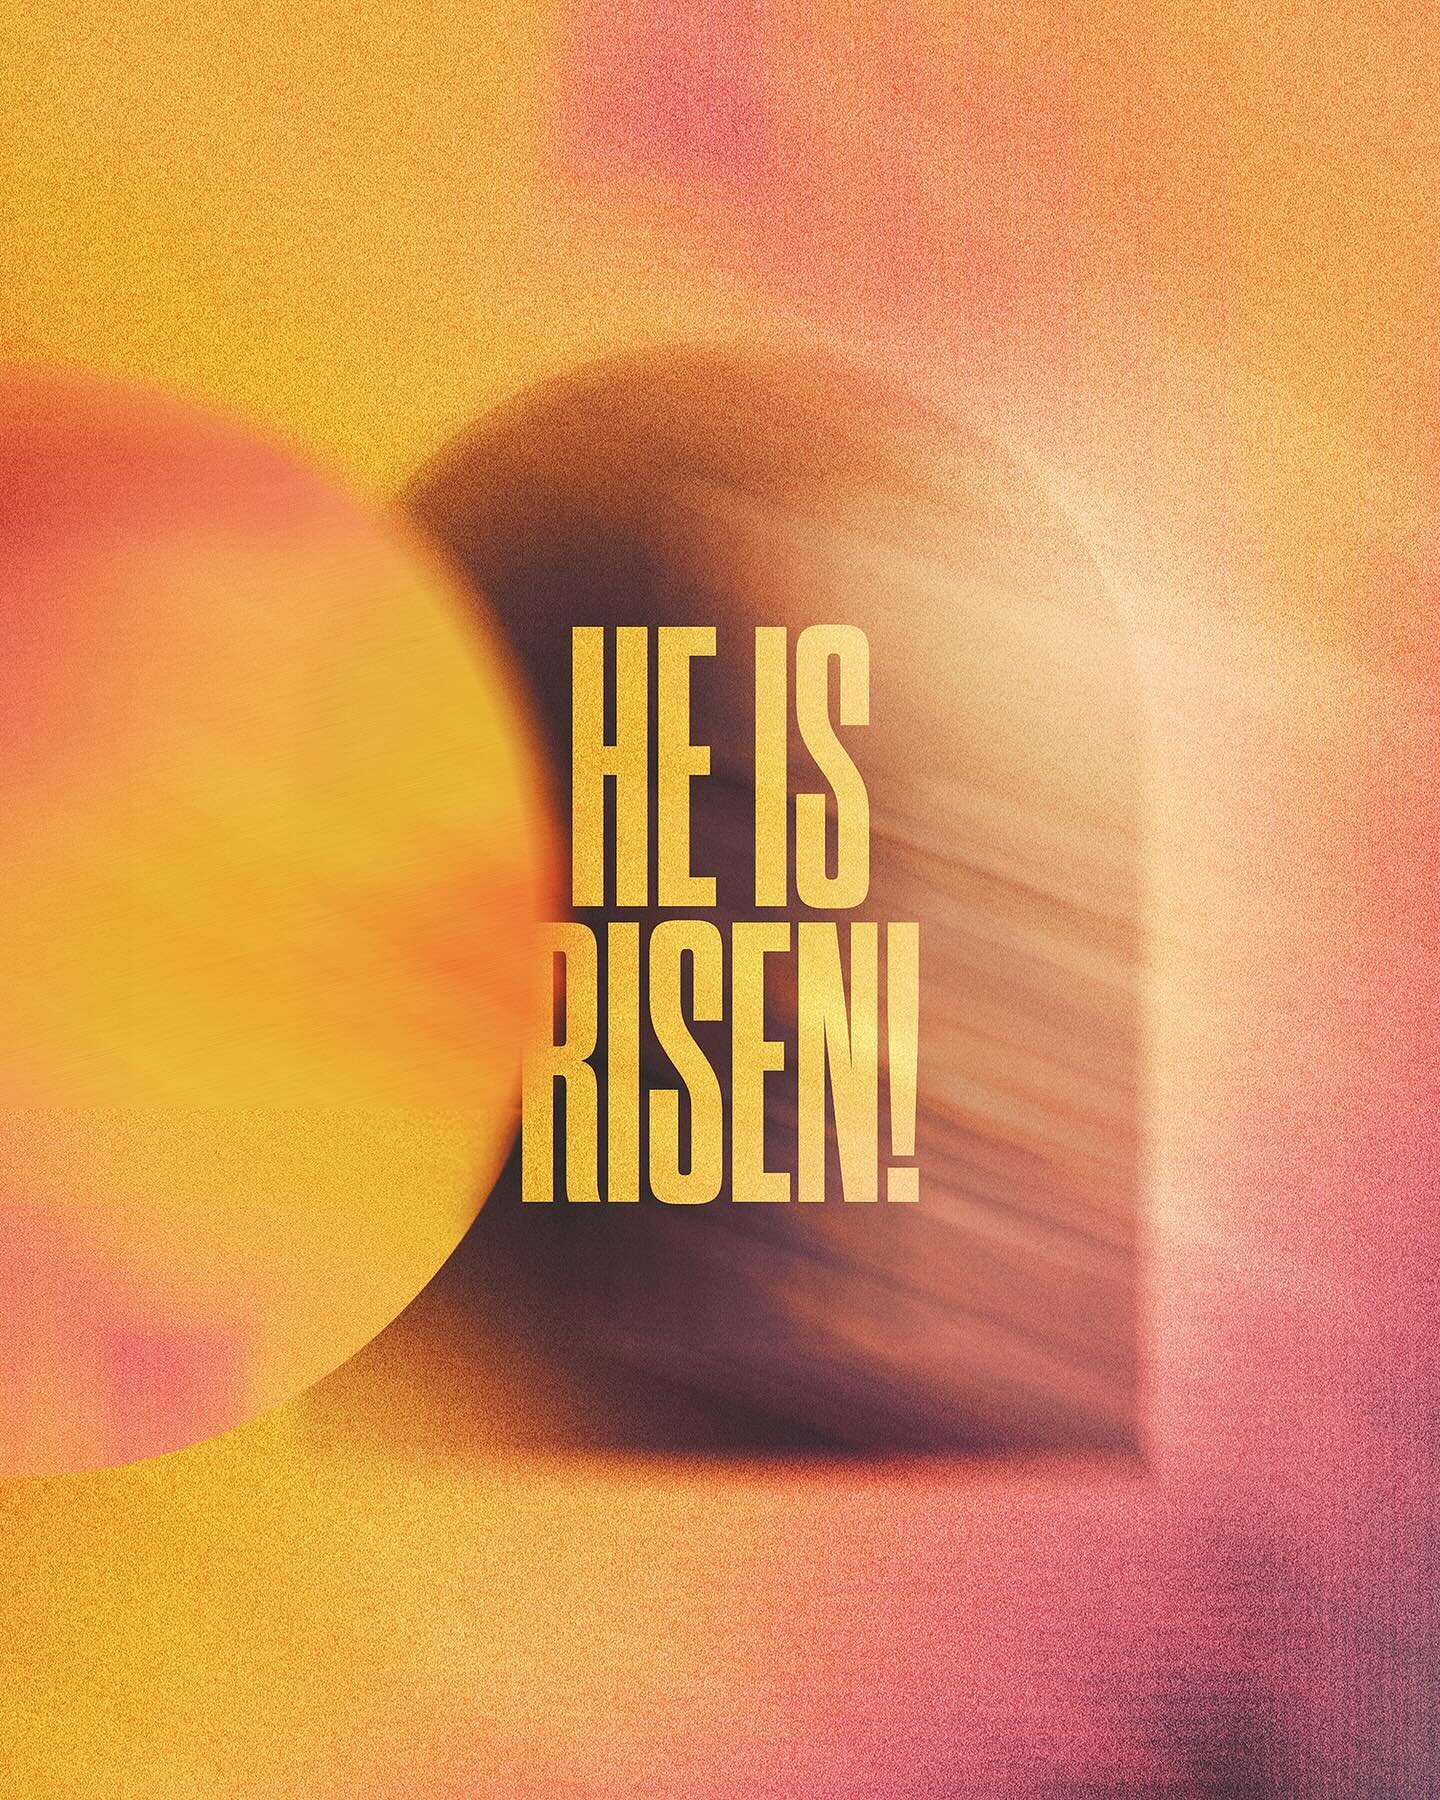 &ldquo;But the angel said to the women, &ldquo;Do not be afraid, for I know that you seek Jesus who was crucified. He is not here, for he has risen, as he said. Come, see the place where he lay.&rdquo;

‭‭Matthew‬ ‭28‬:‭5‬-‭6‬